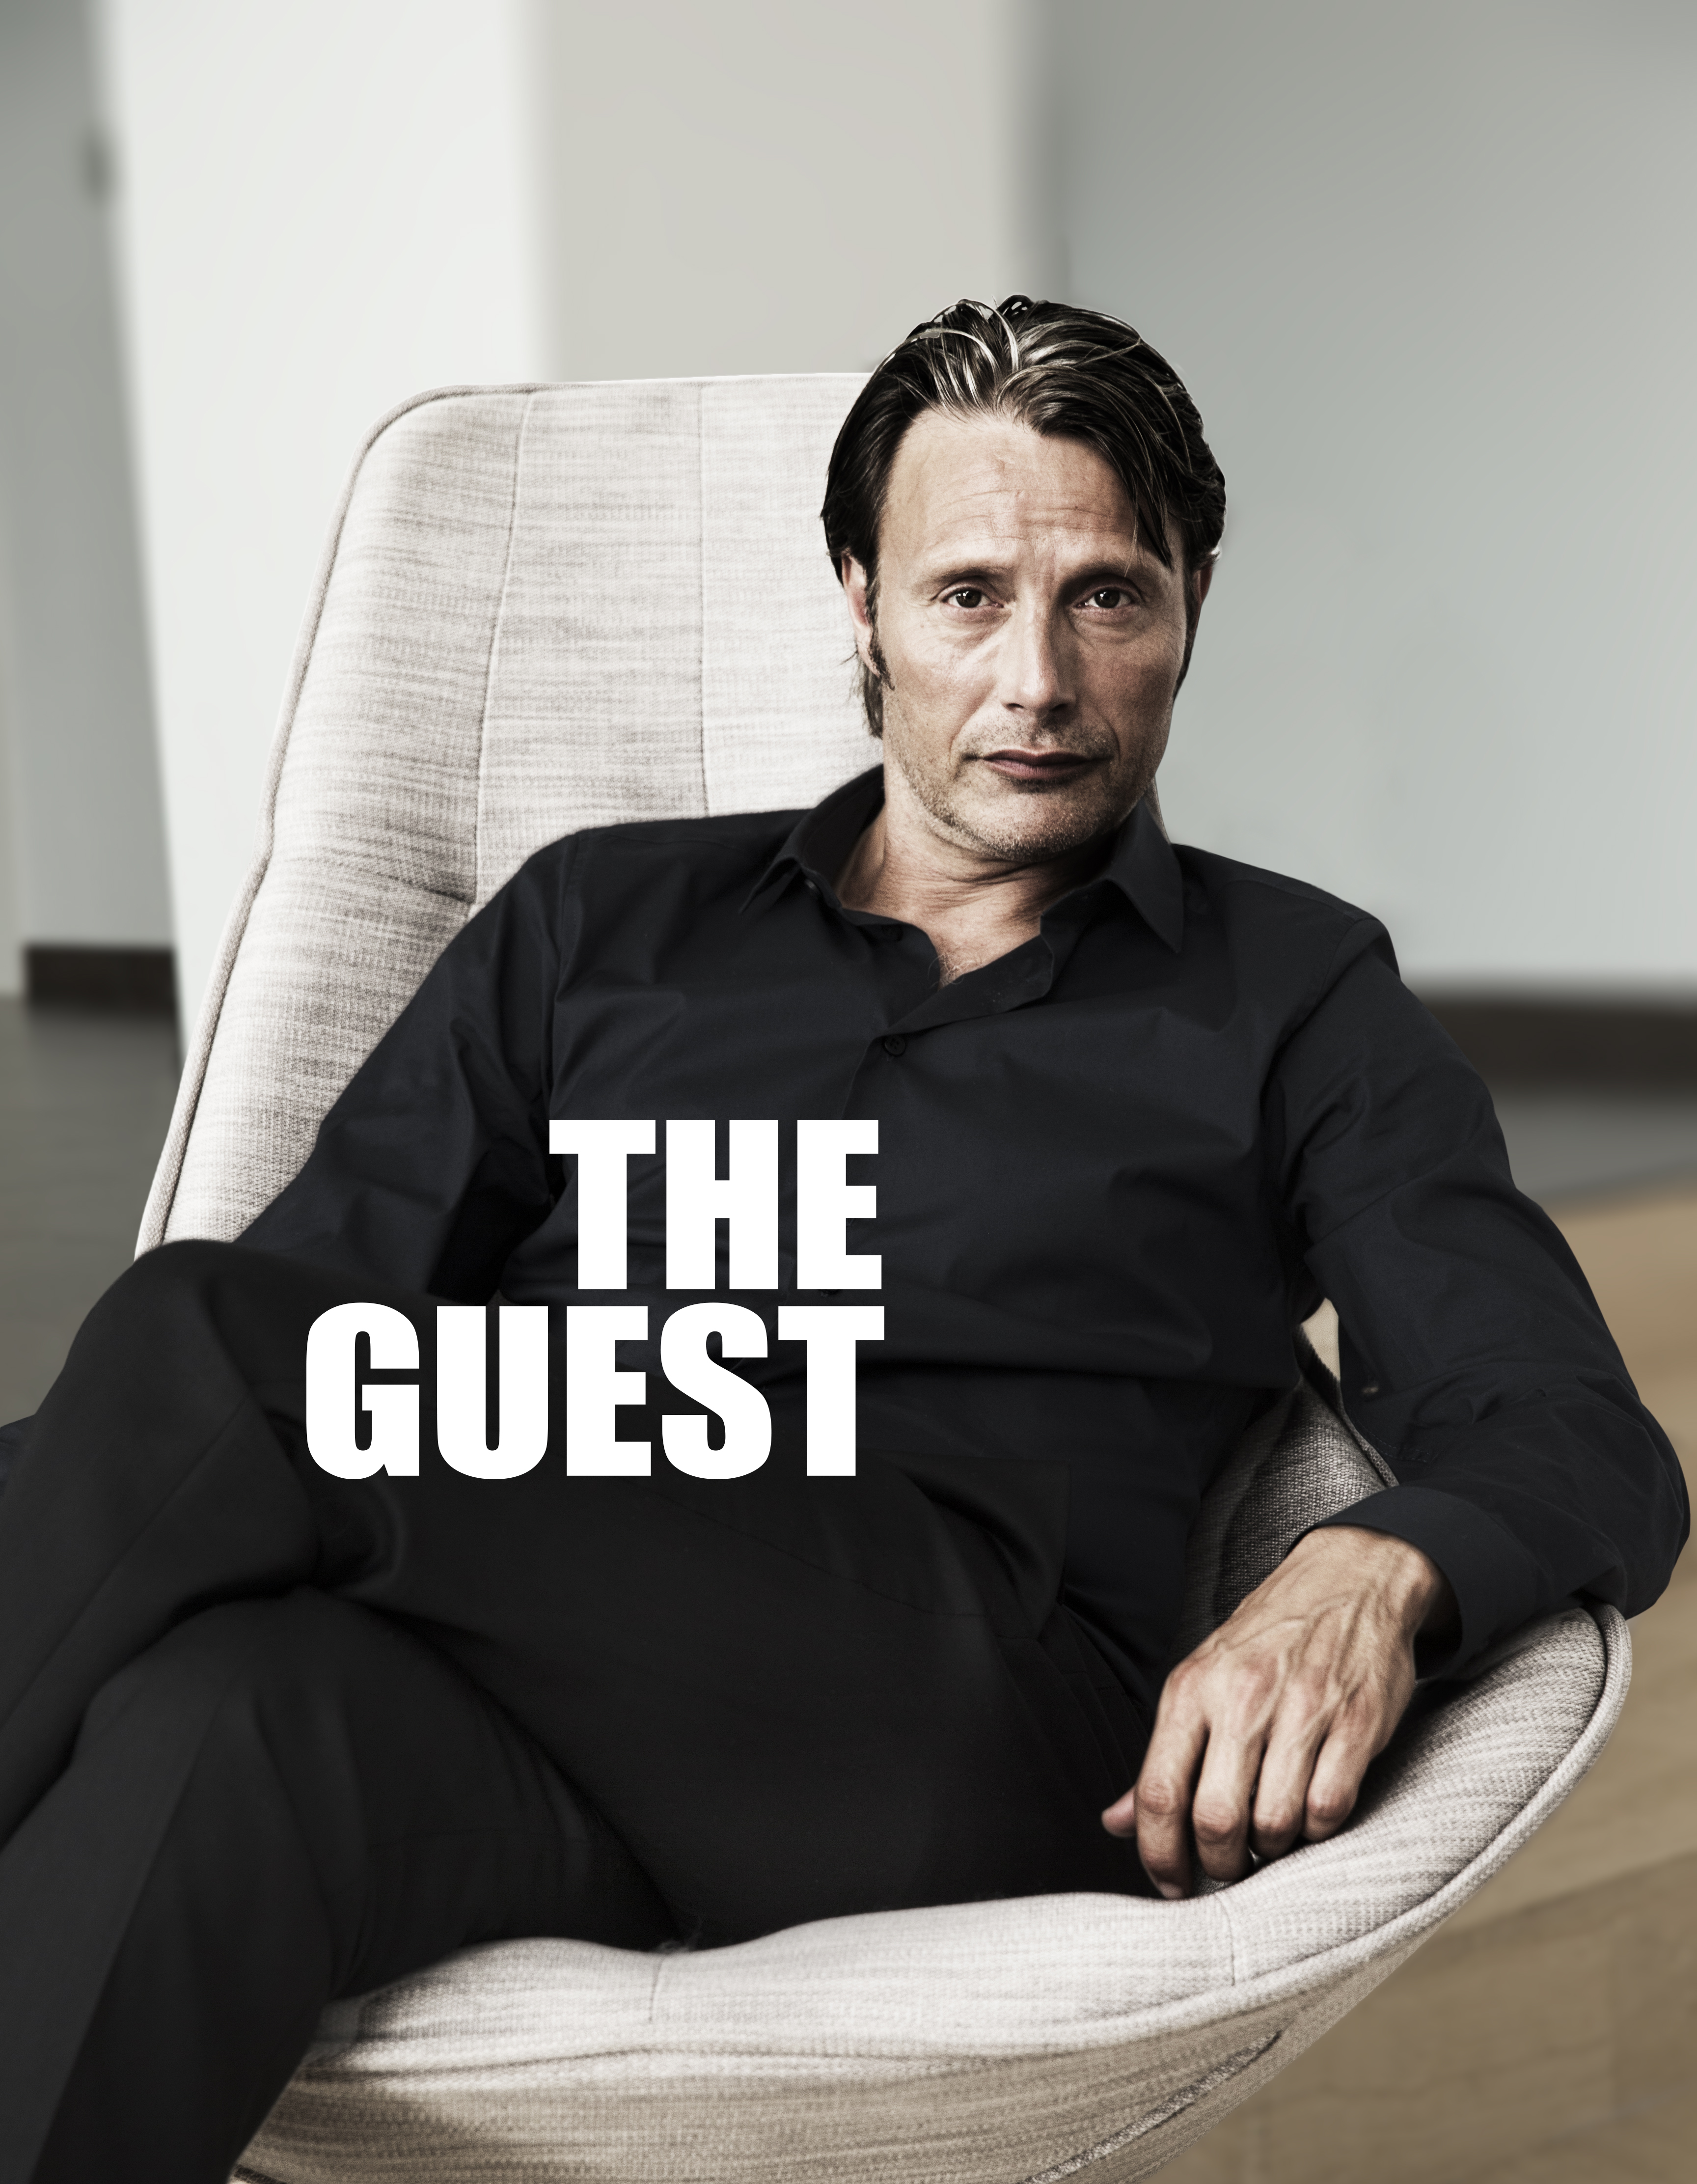 #theguest